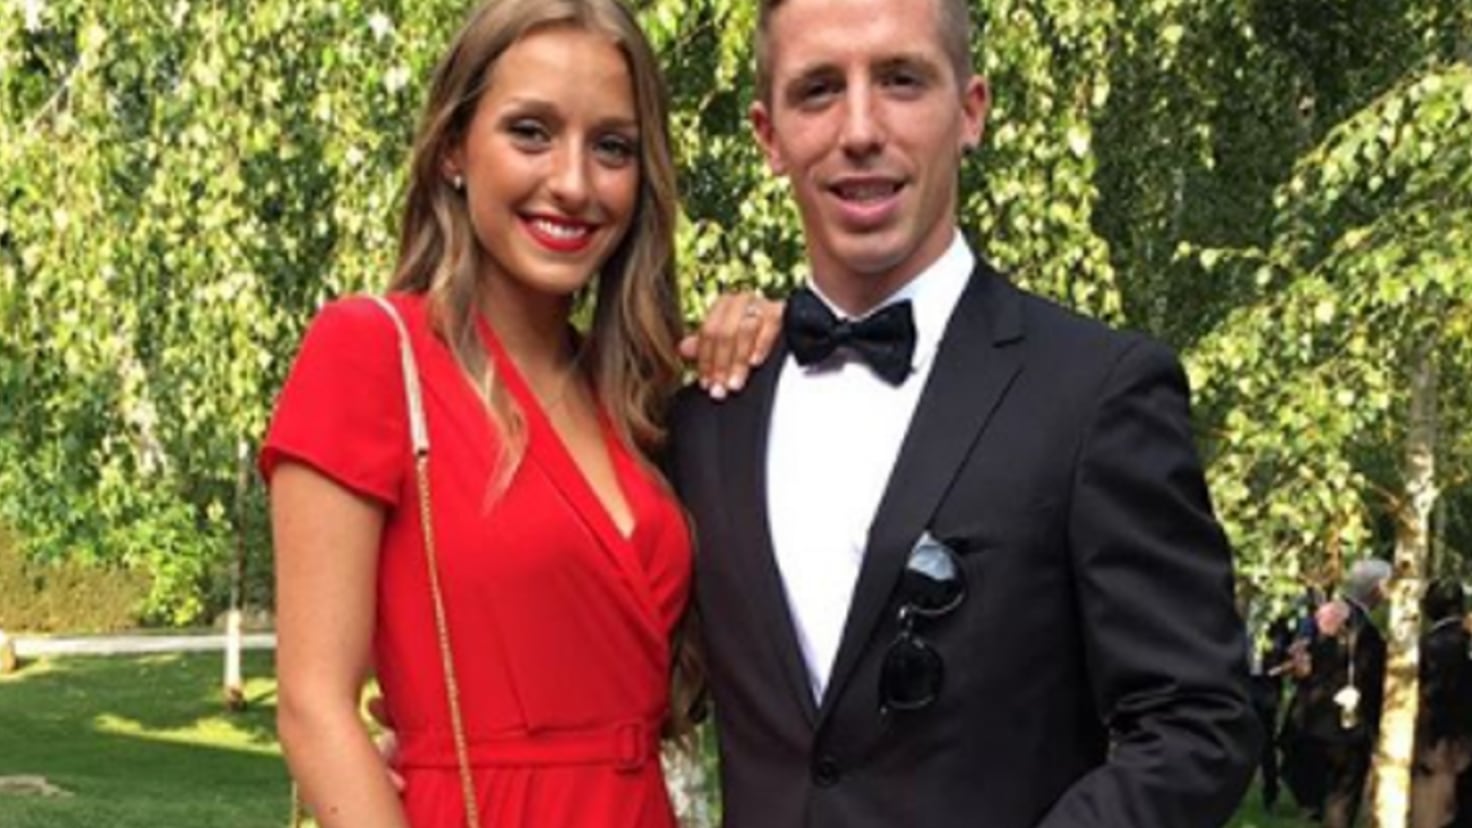 Andrea Sesma, Muniain's ex-wife, makes her relationship with Luis Milla official
